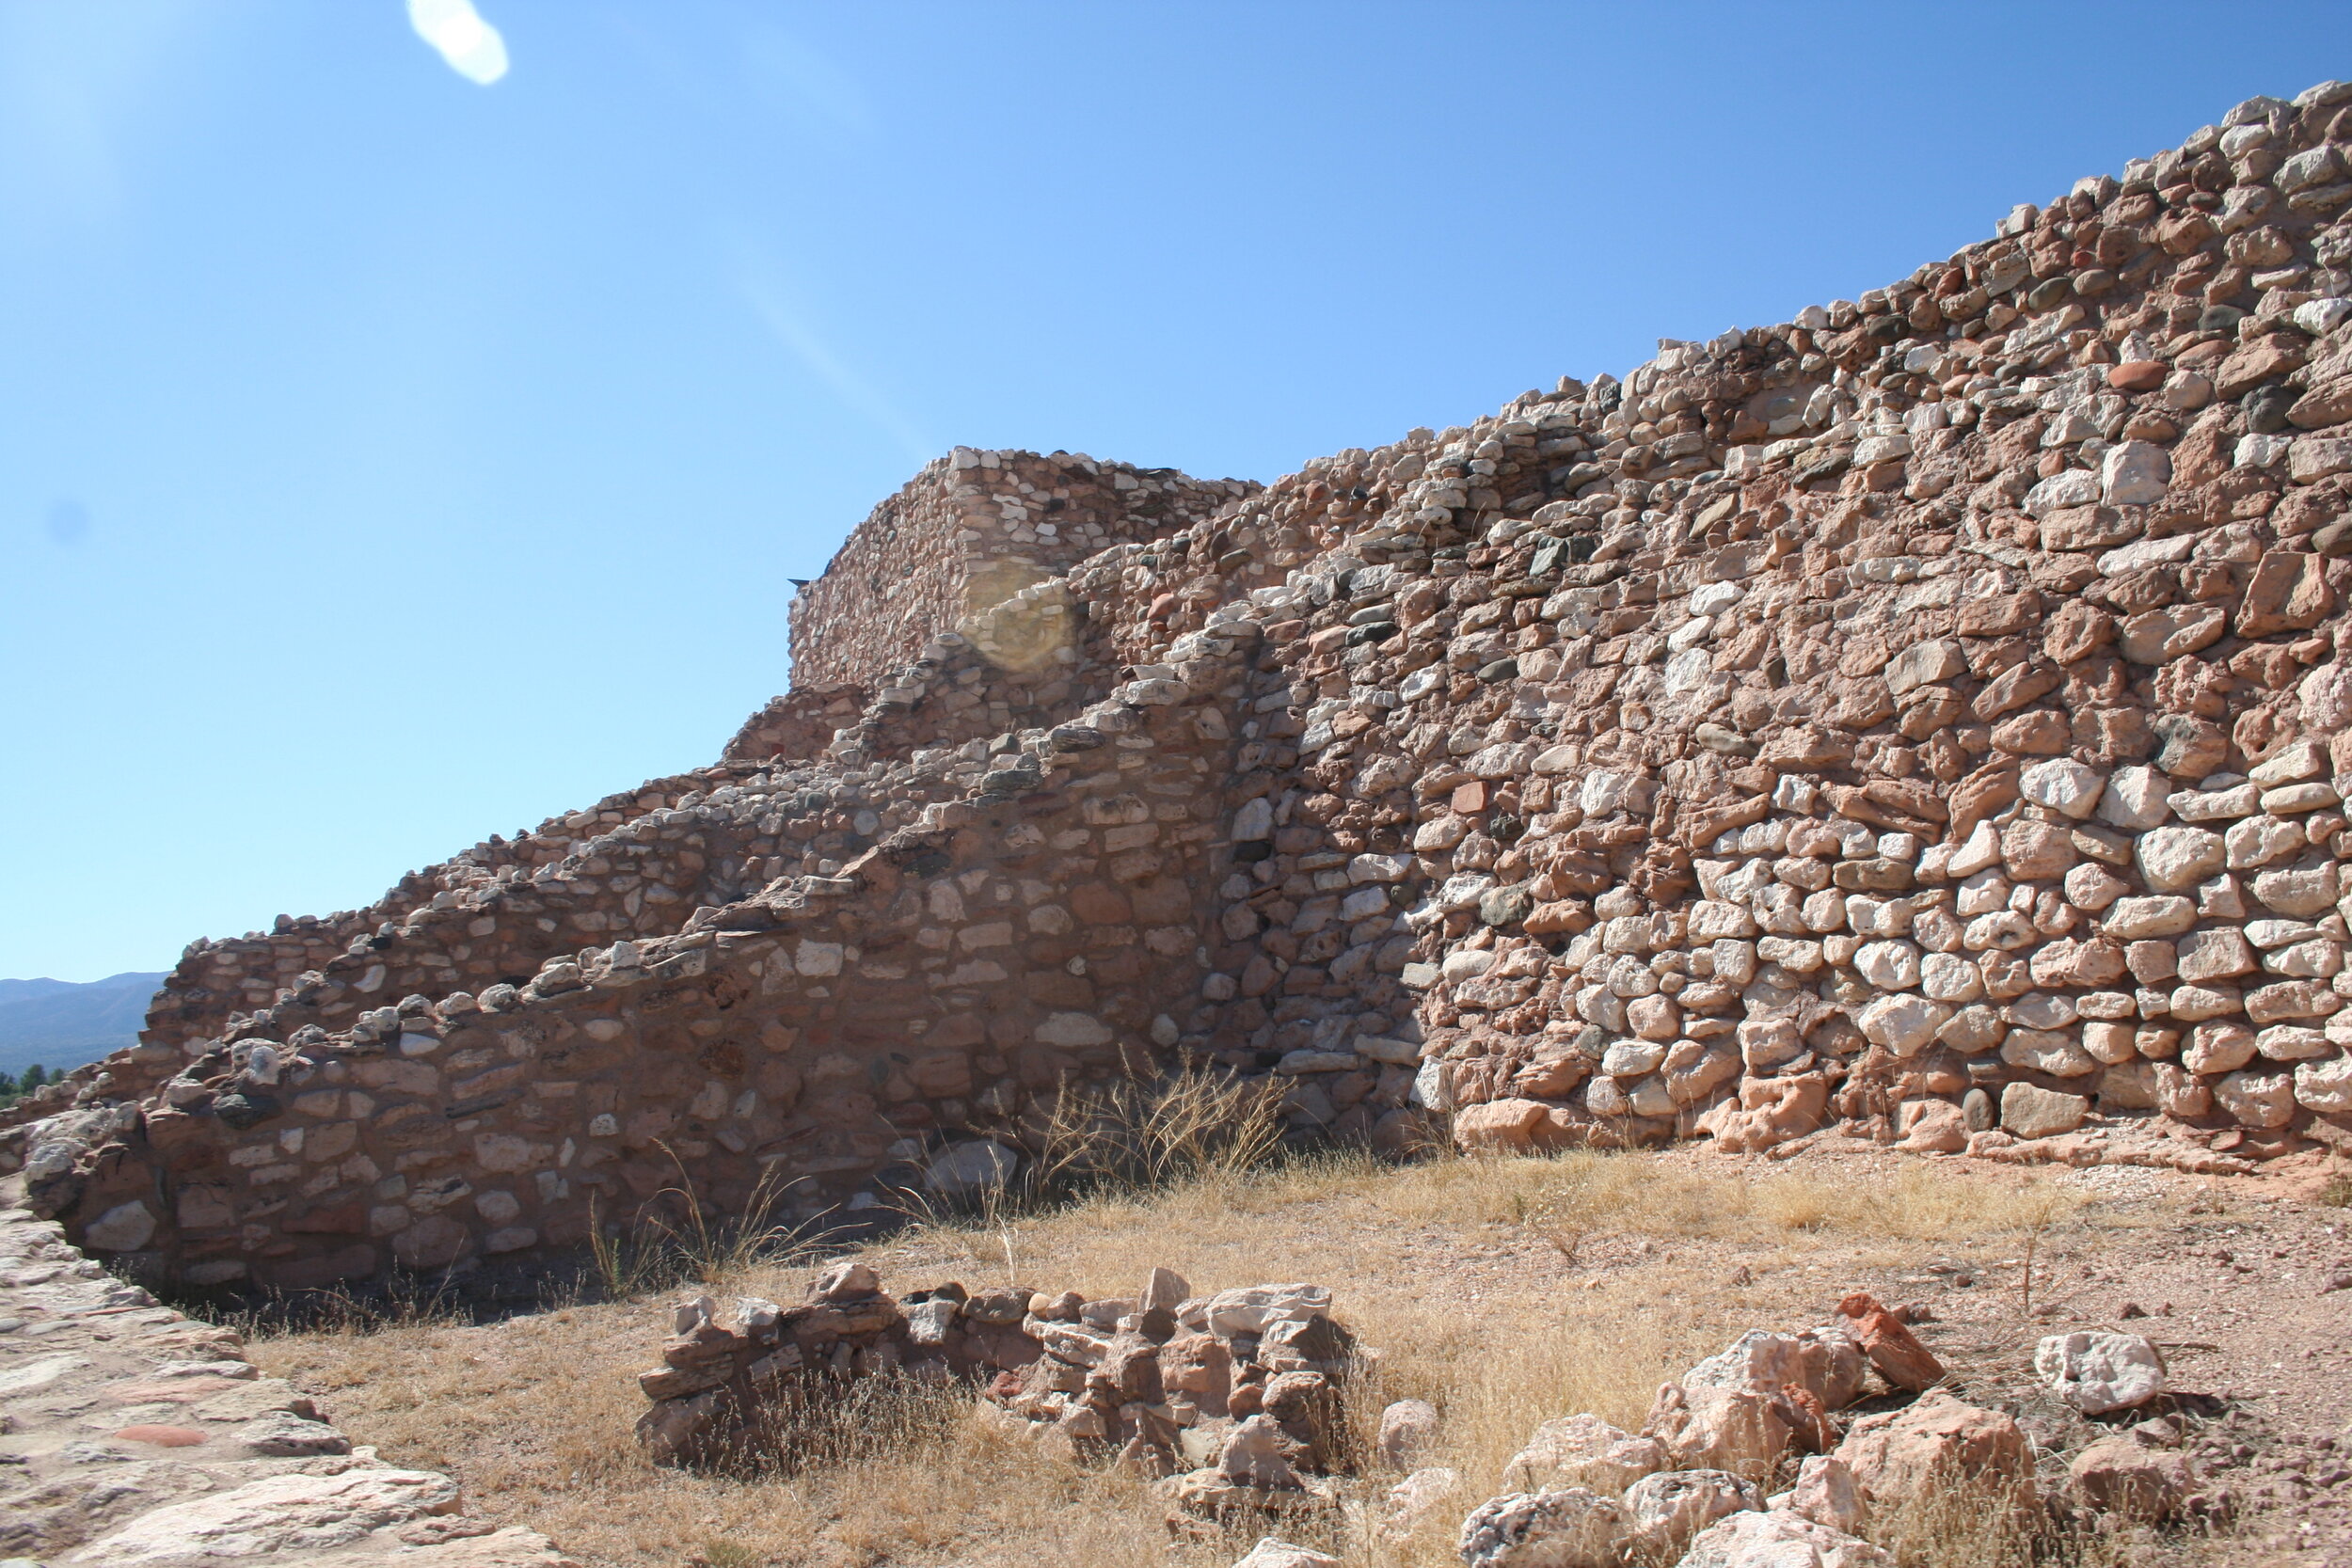   A view of Tuzigoot National Monument.  